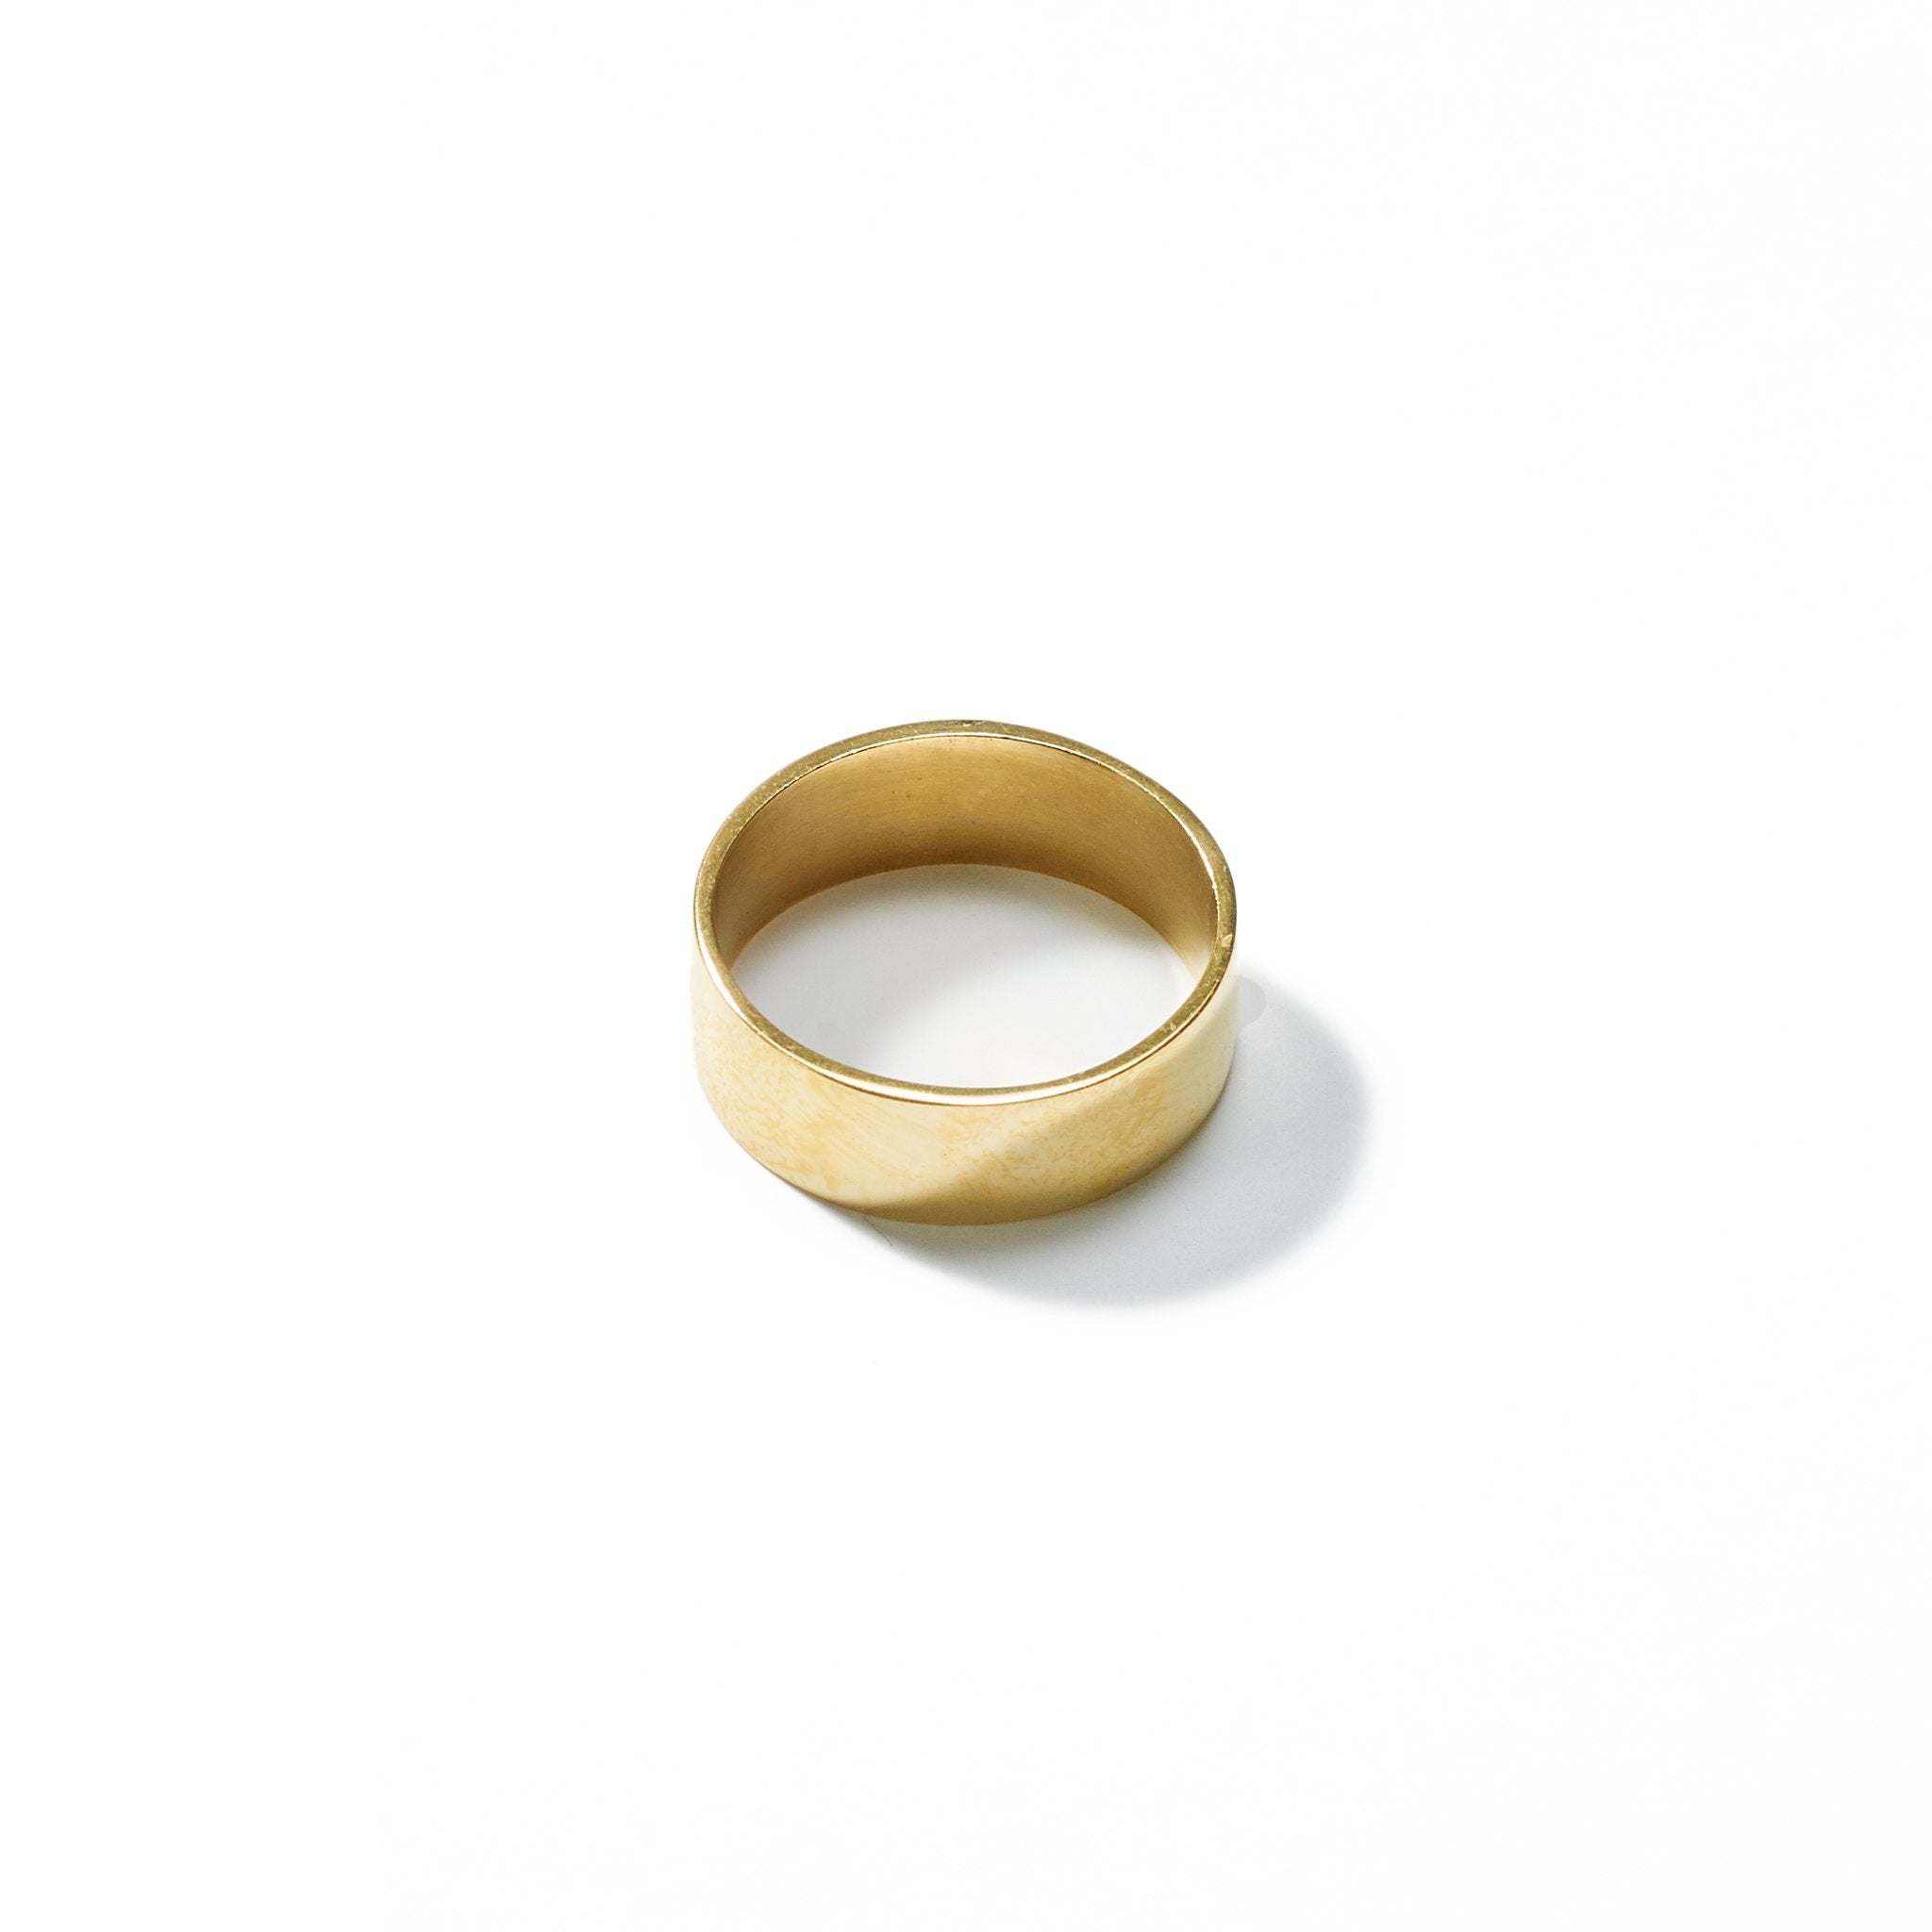 A classic and understated size 6.5 ring, of medium width, handcrafted from upcycled brass.Perfect for stacking or beautiful alone.